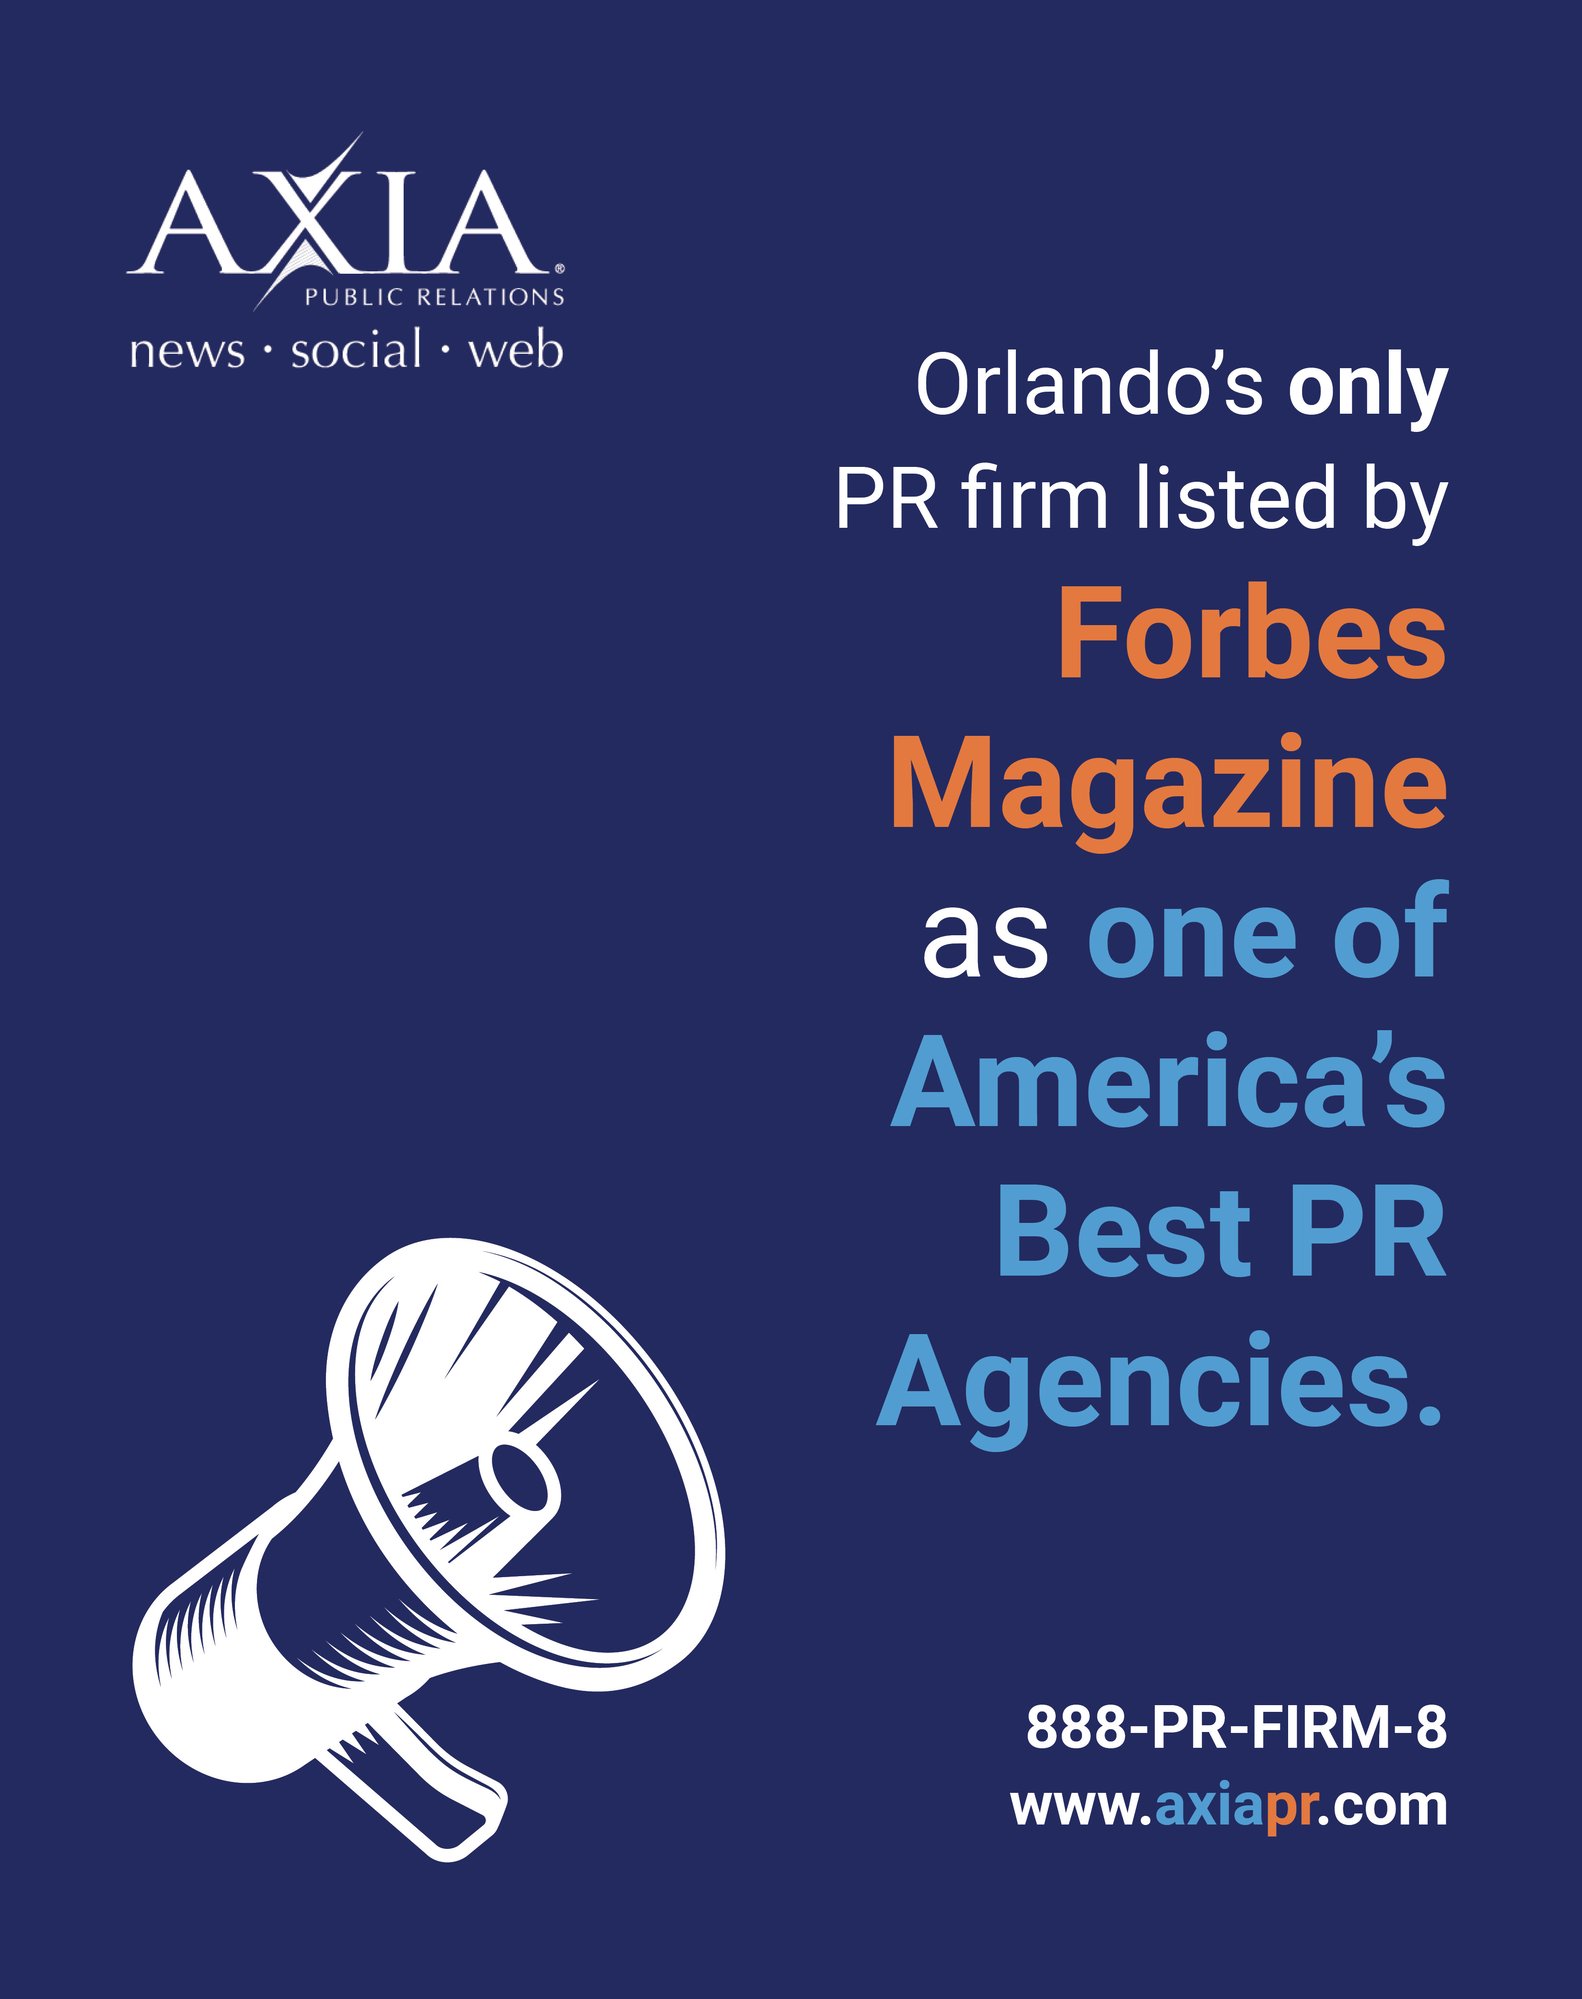 Graphic explaining that Axia is the only PR firm in Orlando that on Forbes Magazine's "America's Best PR Agencies" list.